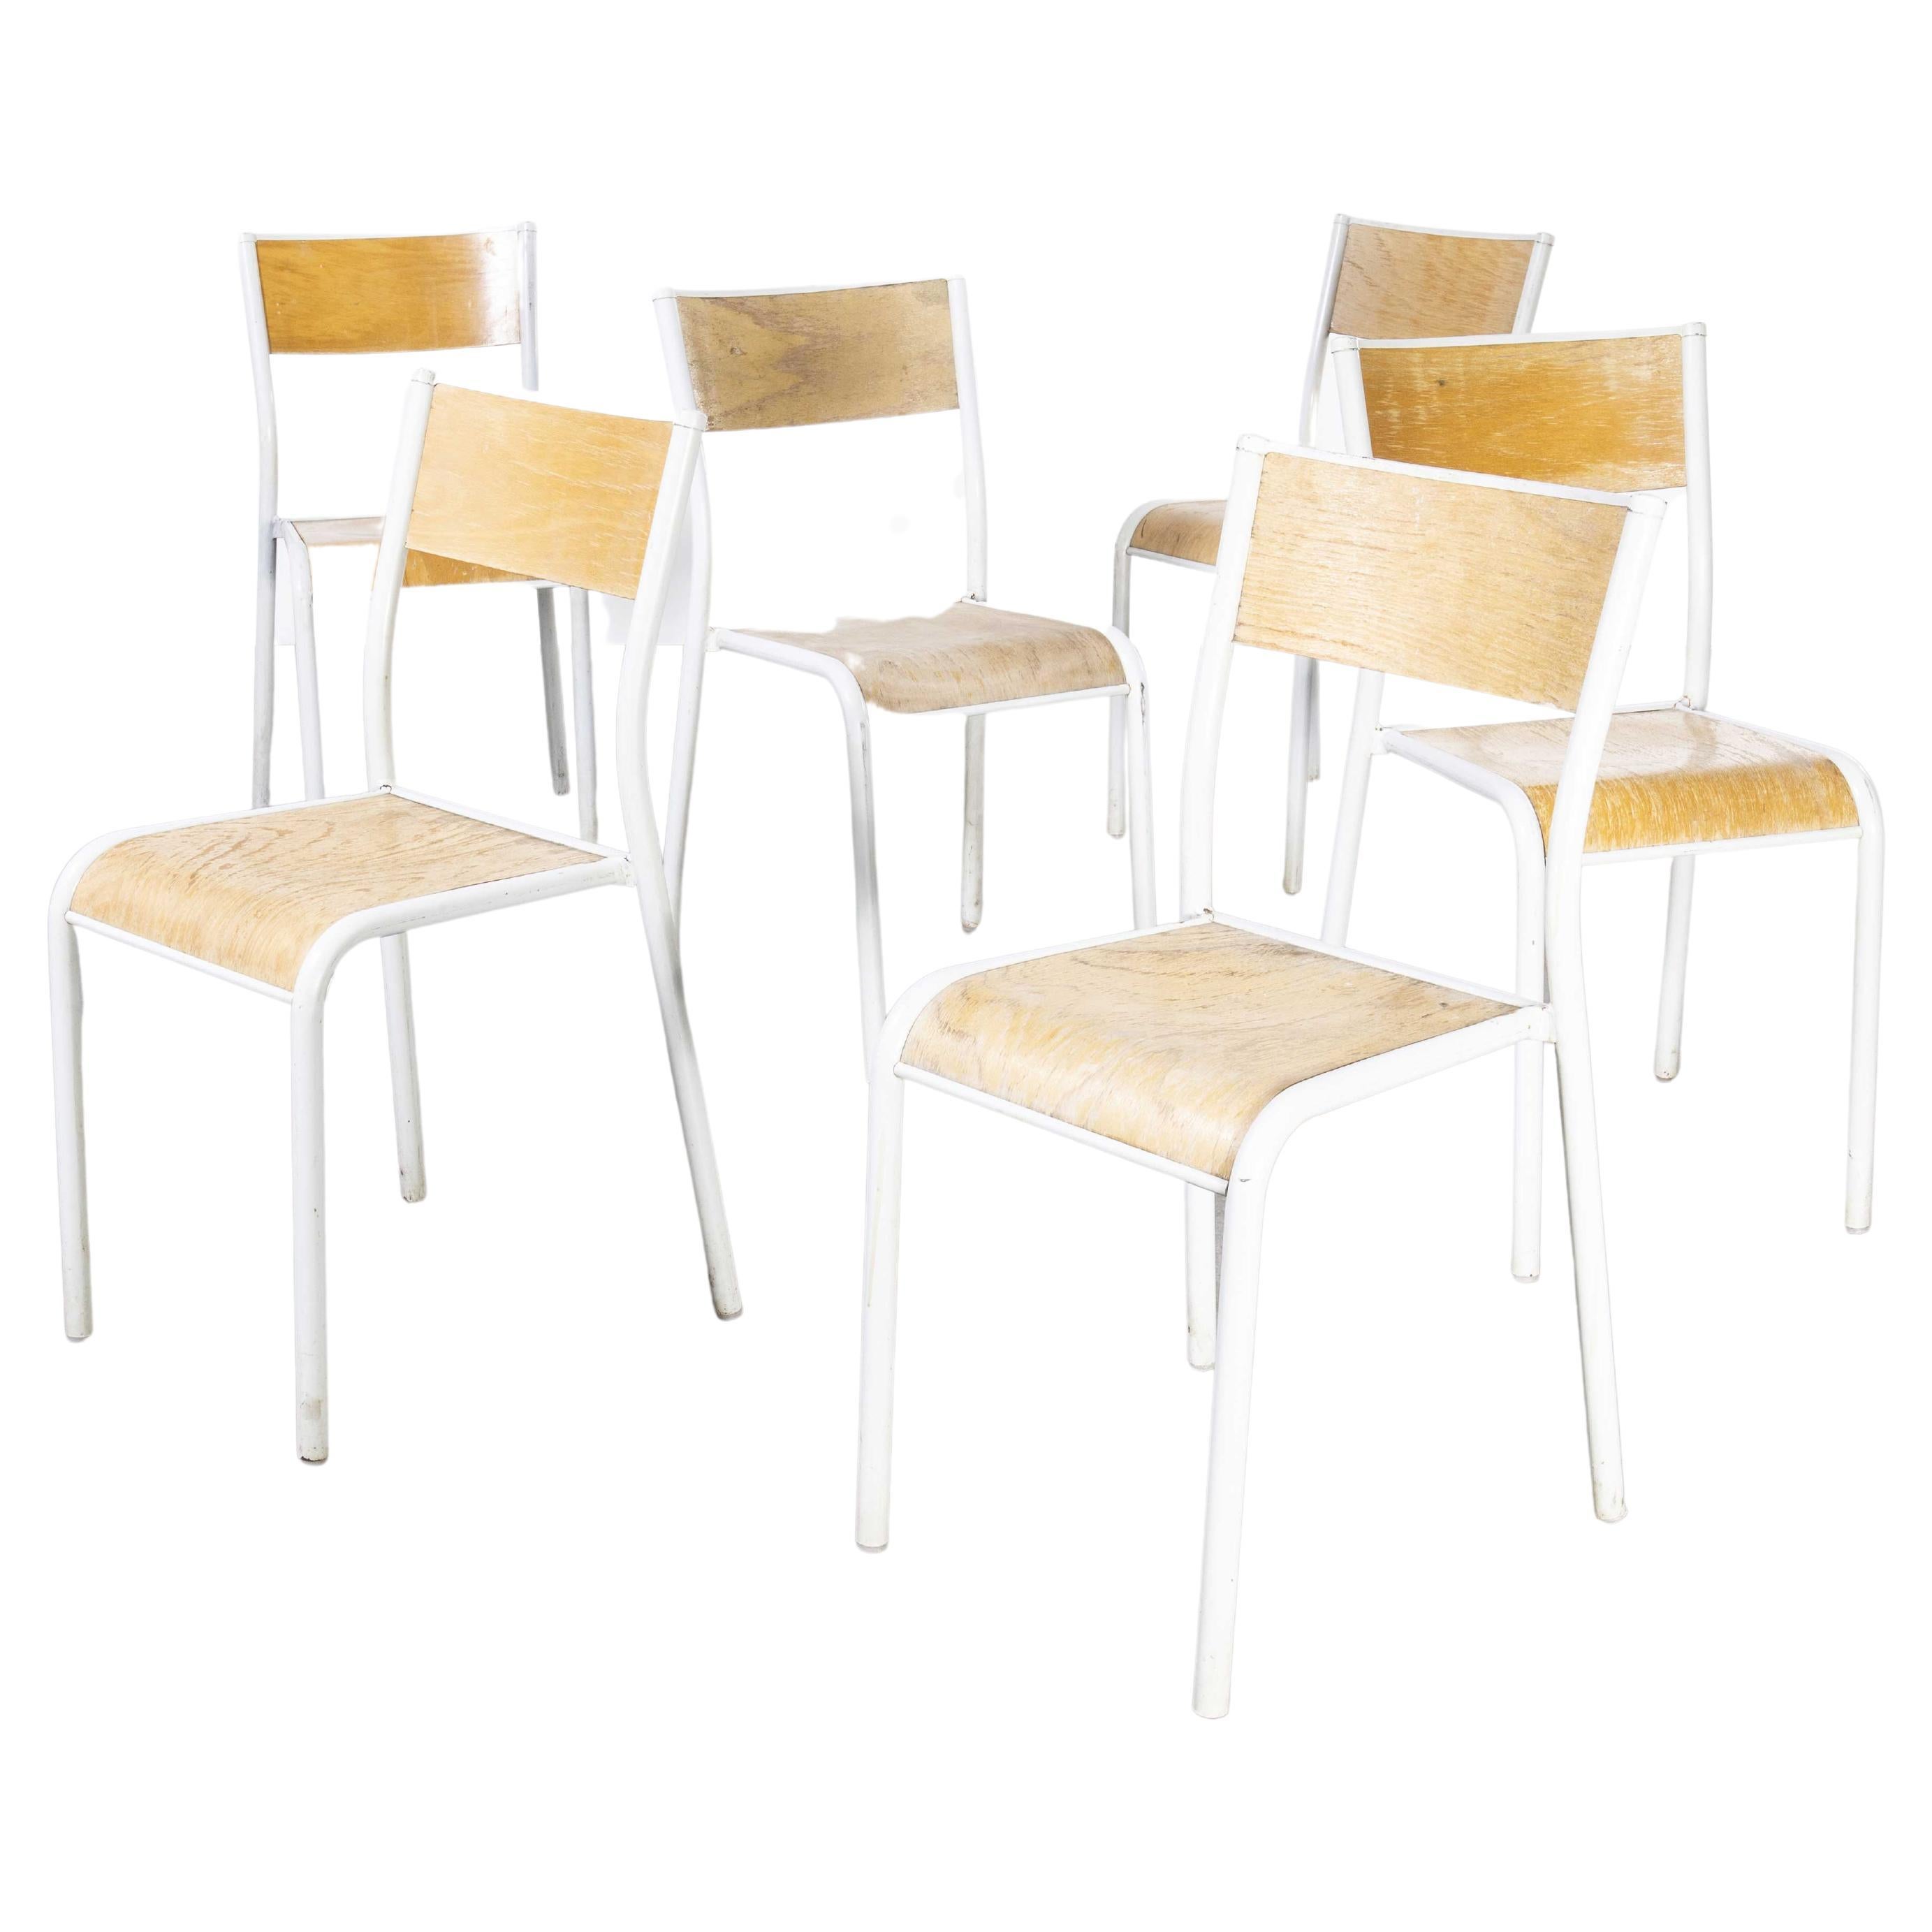 1950's French Mullca Stacking School, Dining Chairs, White Model 510, Set of 